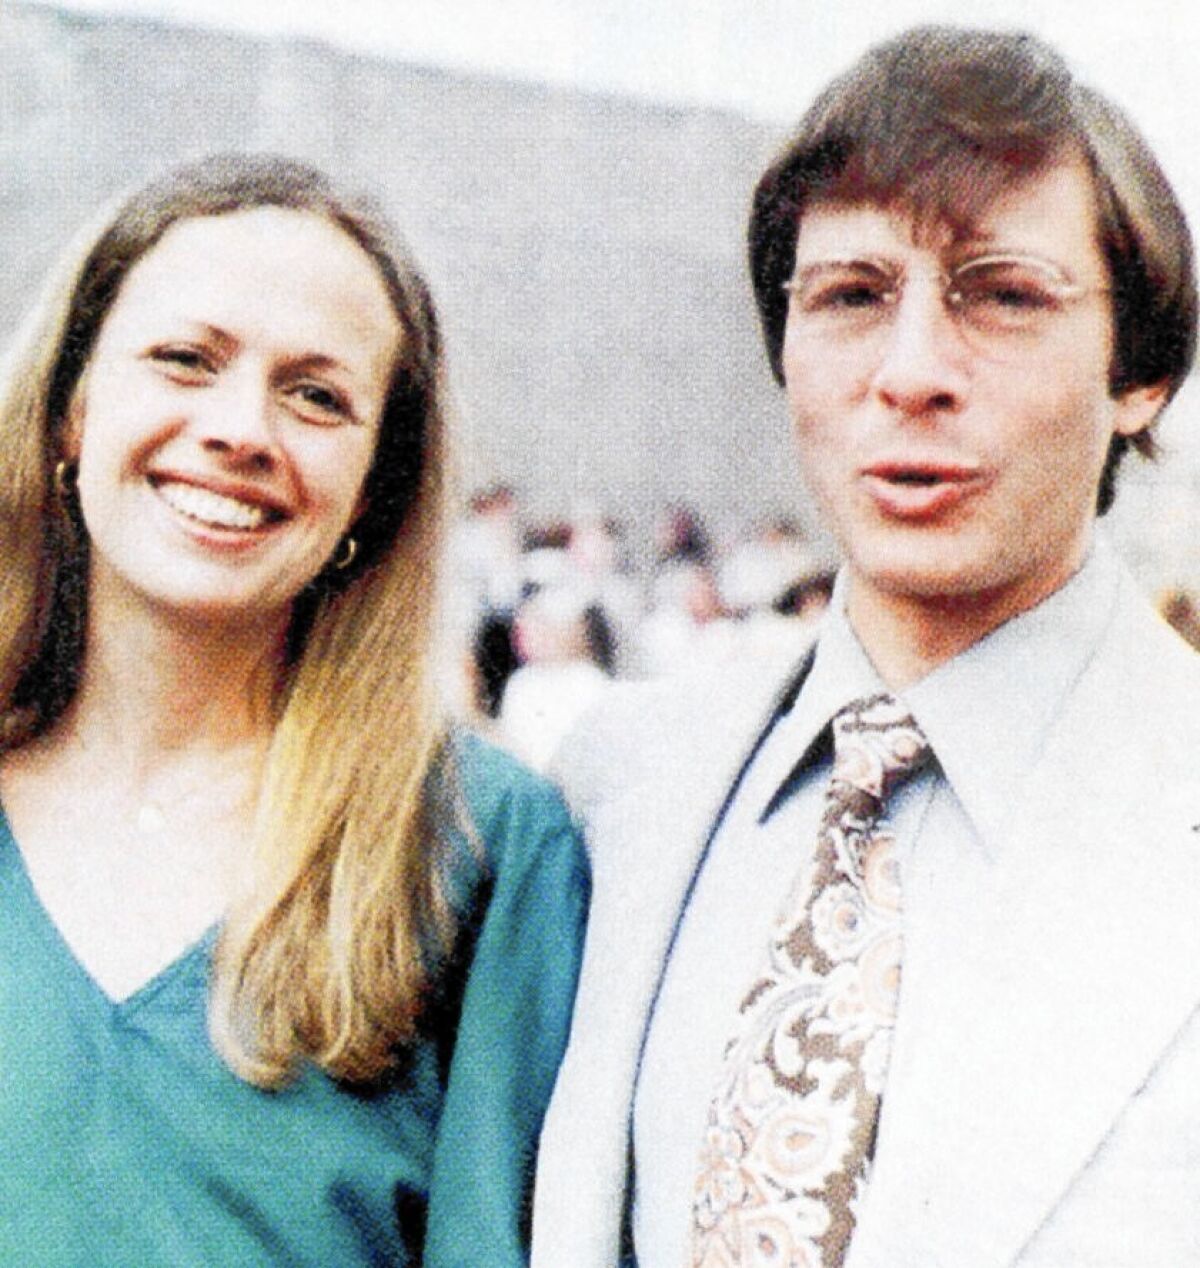 Robert Durst and his wife, Kathleen, who disappeared in 1982.